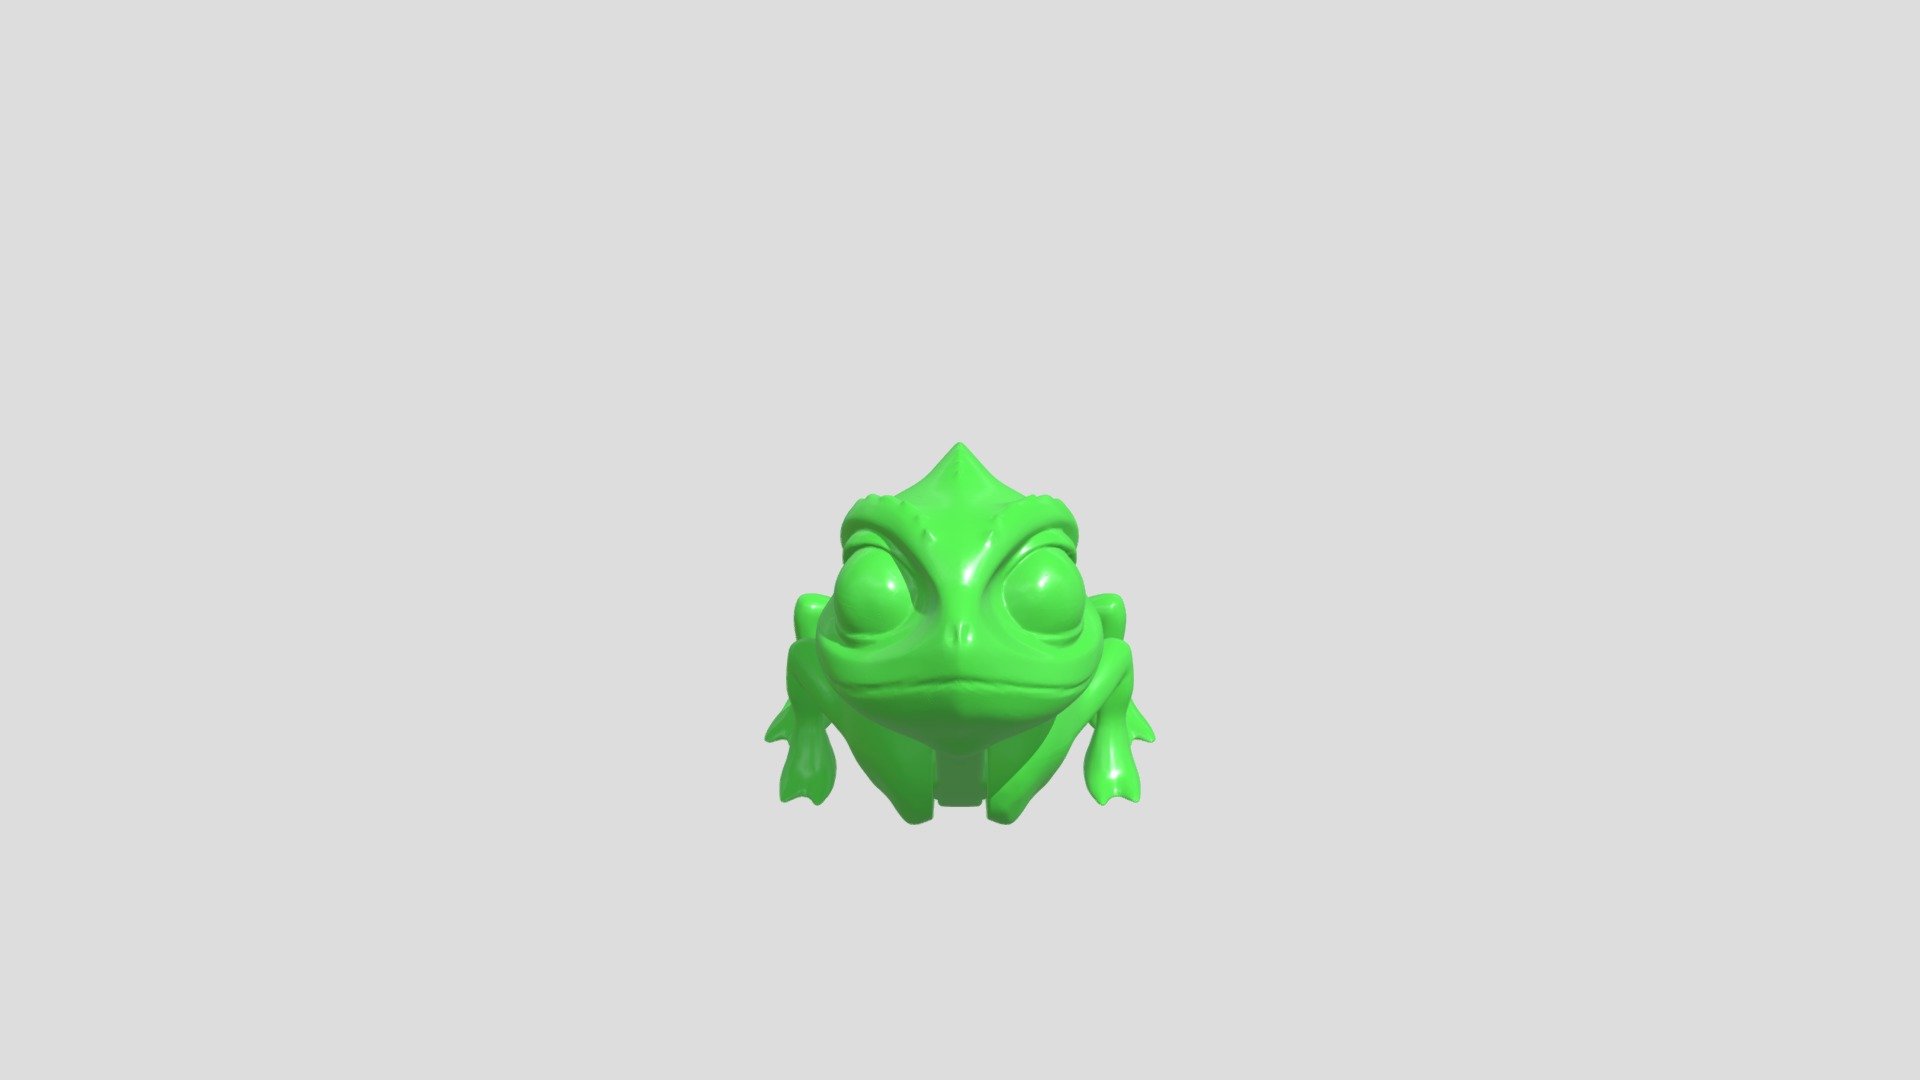 Cute chameleon with moving head and tail!
For you and your kids to play with, it's very easy to print, doesn't need any support!
There’s a button in the back for moving the head.
Have fun! Enjoy 3DTROOP!
Don't forget to hit like and follow us! Every week we will be posting new models for you!
Check out other of 3DTROOP models:

https://cults3d.com/en/users/3DTROOP

3D PRINTING SETTINGS
Dimensions(mm): 162 x 70 x 60
Layer heigh: 0,15mm
Walls: 2
Infill: 15%
Material: PLA
No support required.
Printing time: ~4,5h - Chameleon Flex - 3D model by 3DTROOP 3d model